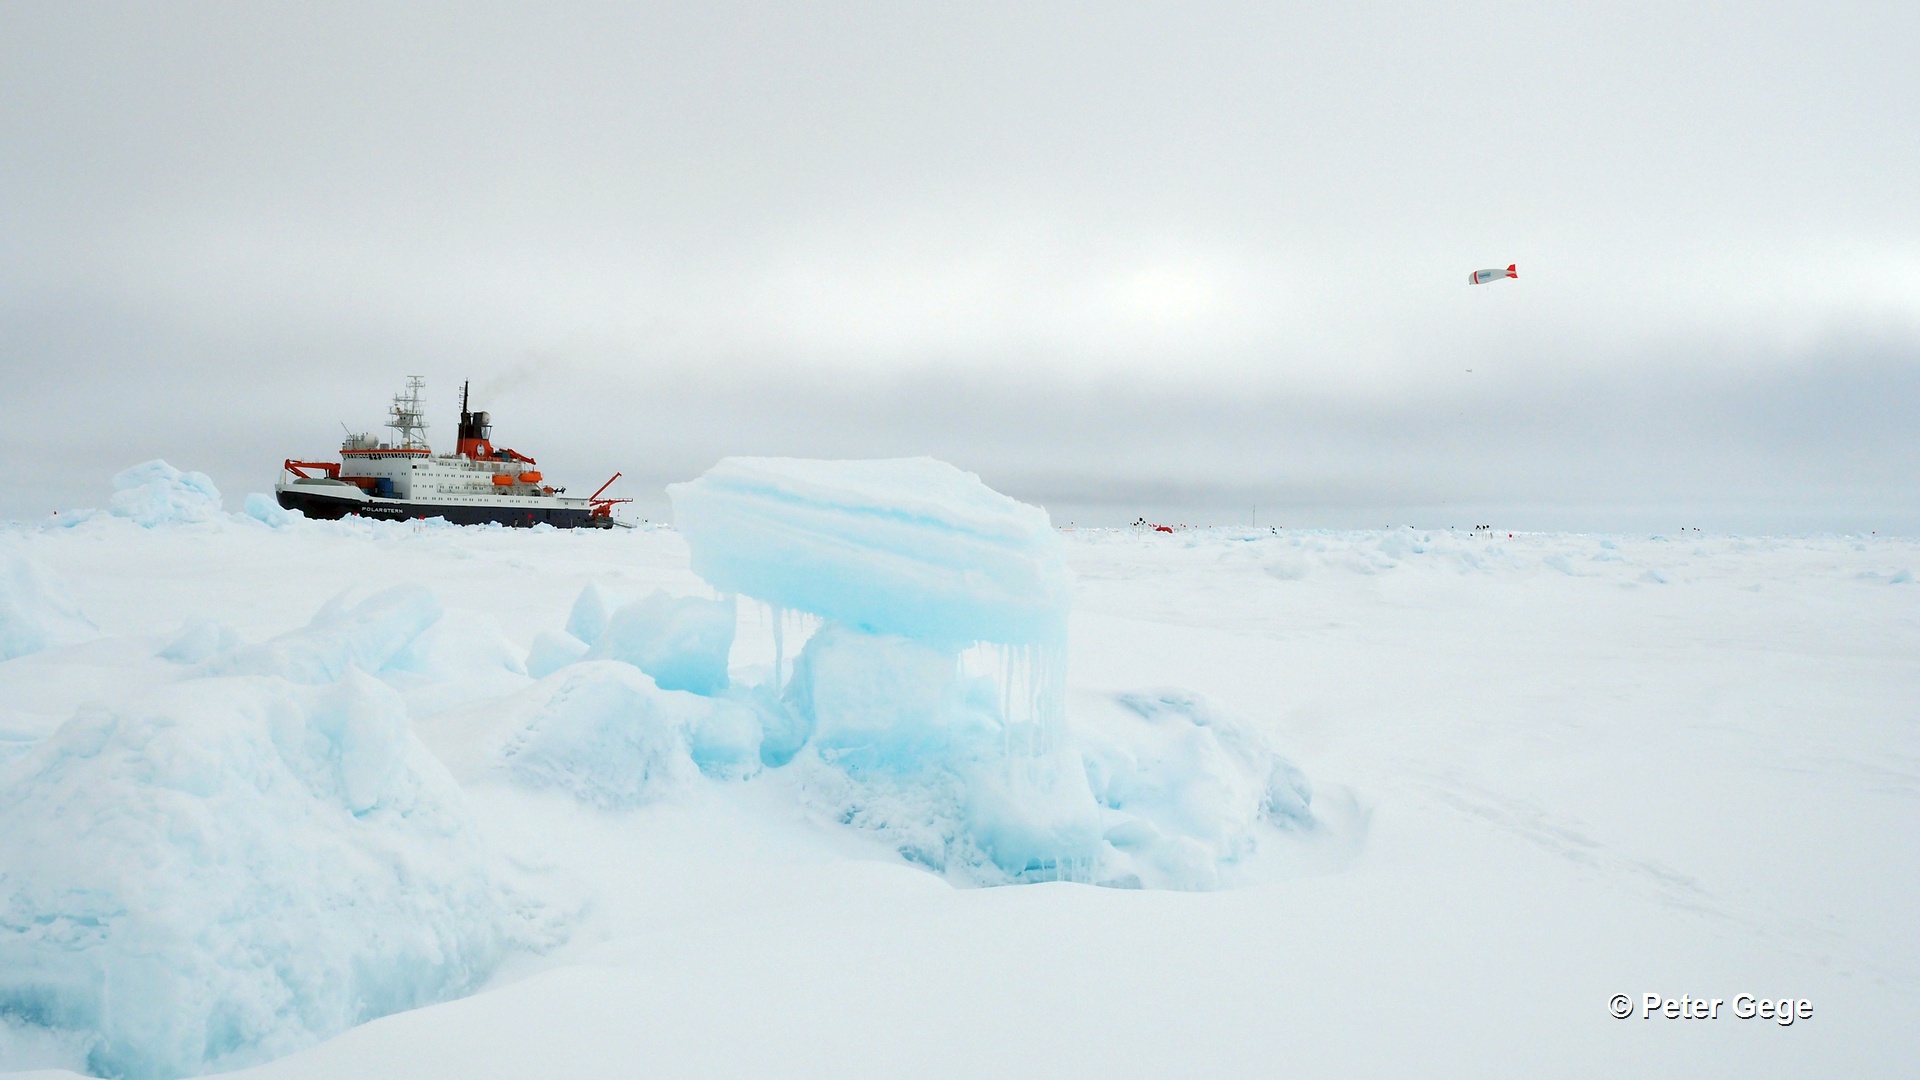 The German research vessel Polarstern and the ice camp during PASCAL 2017.